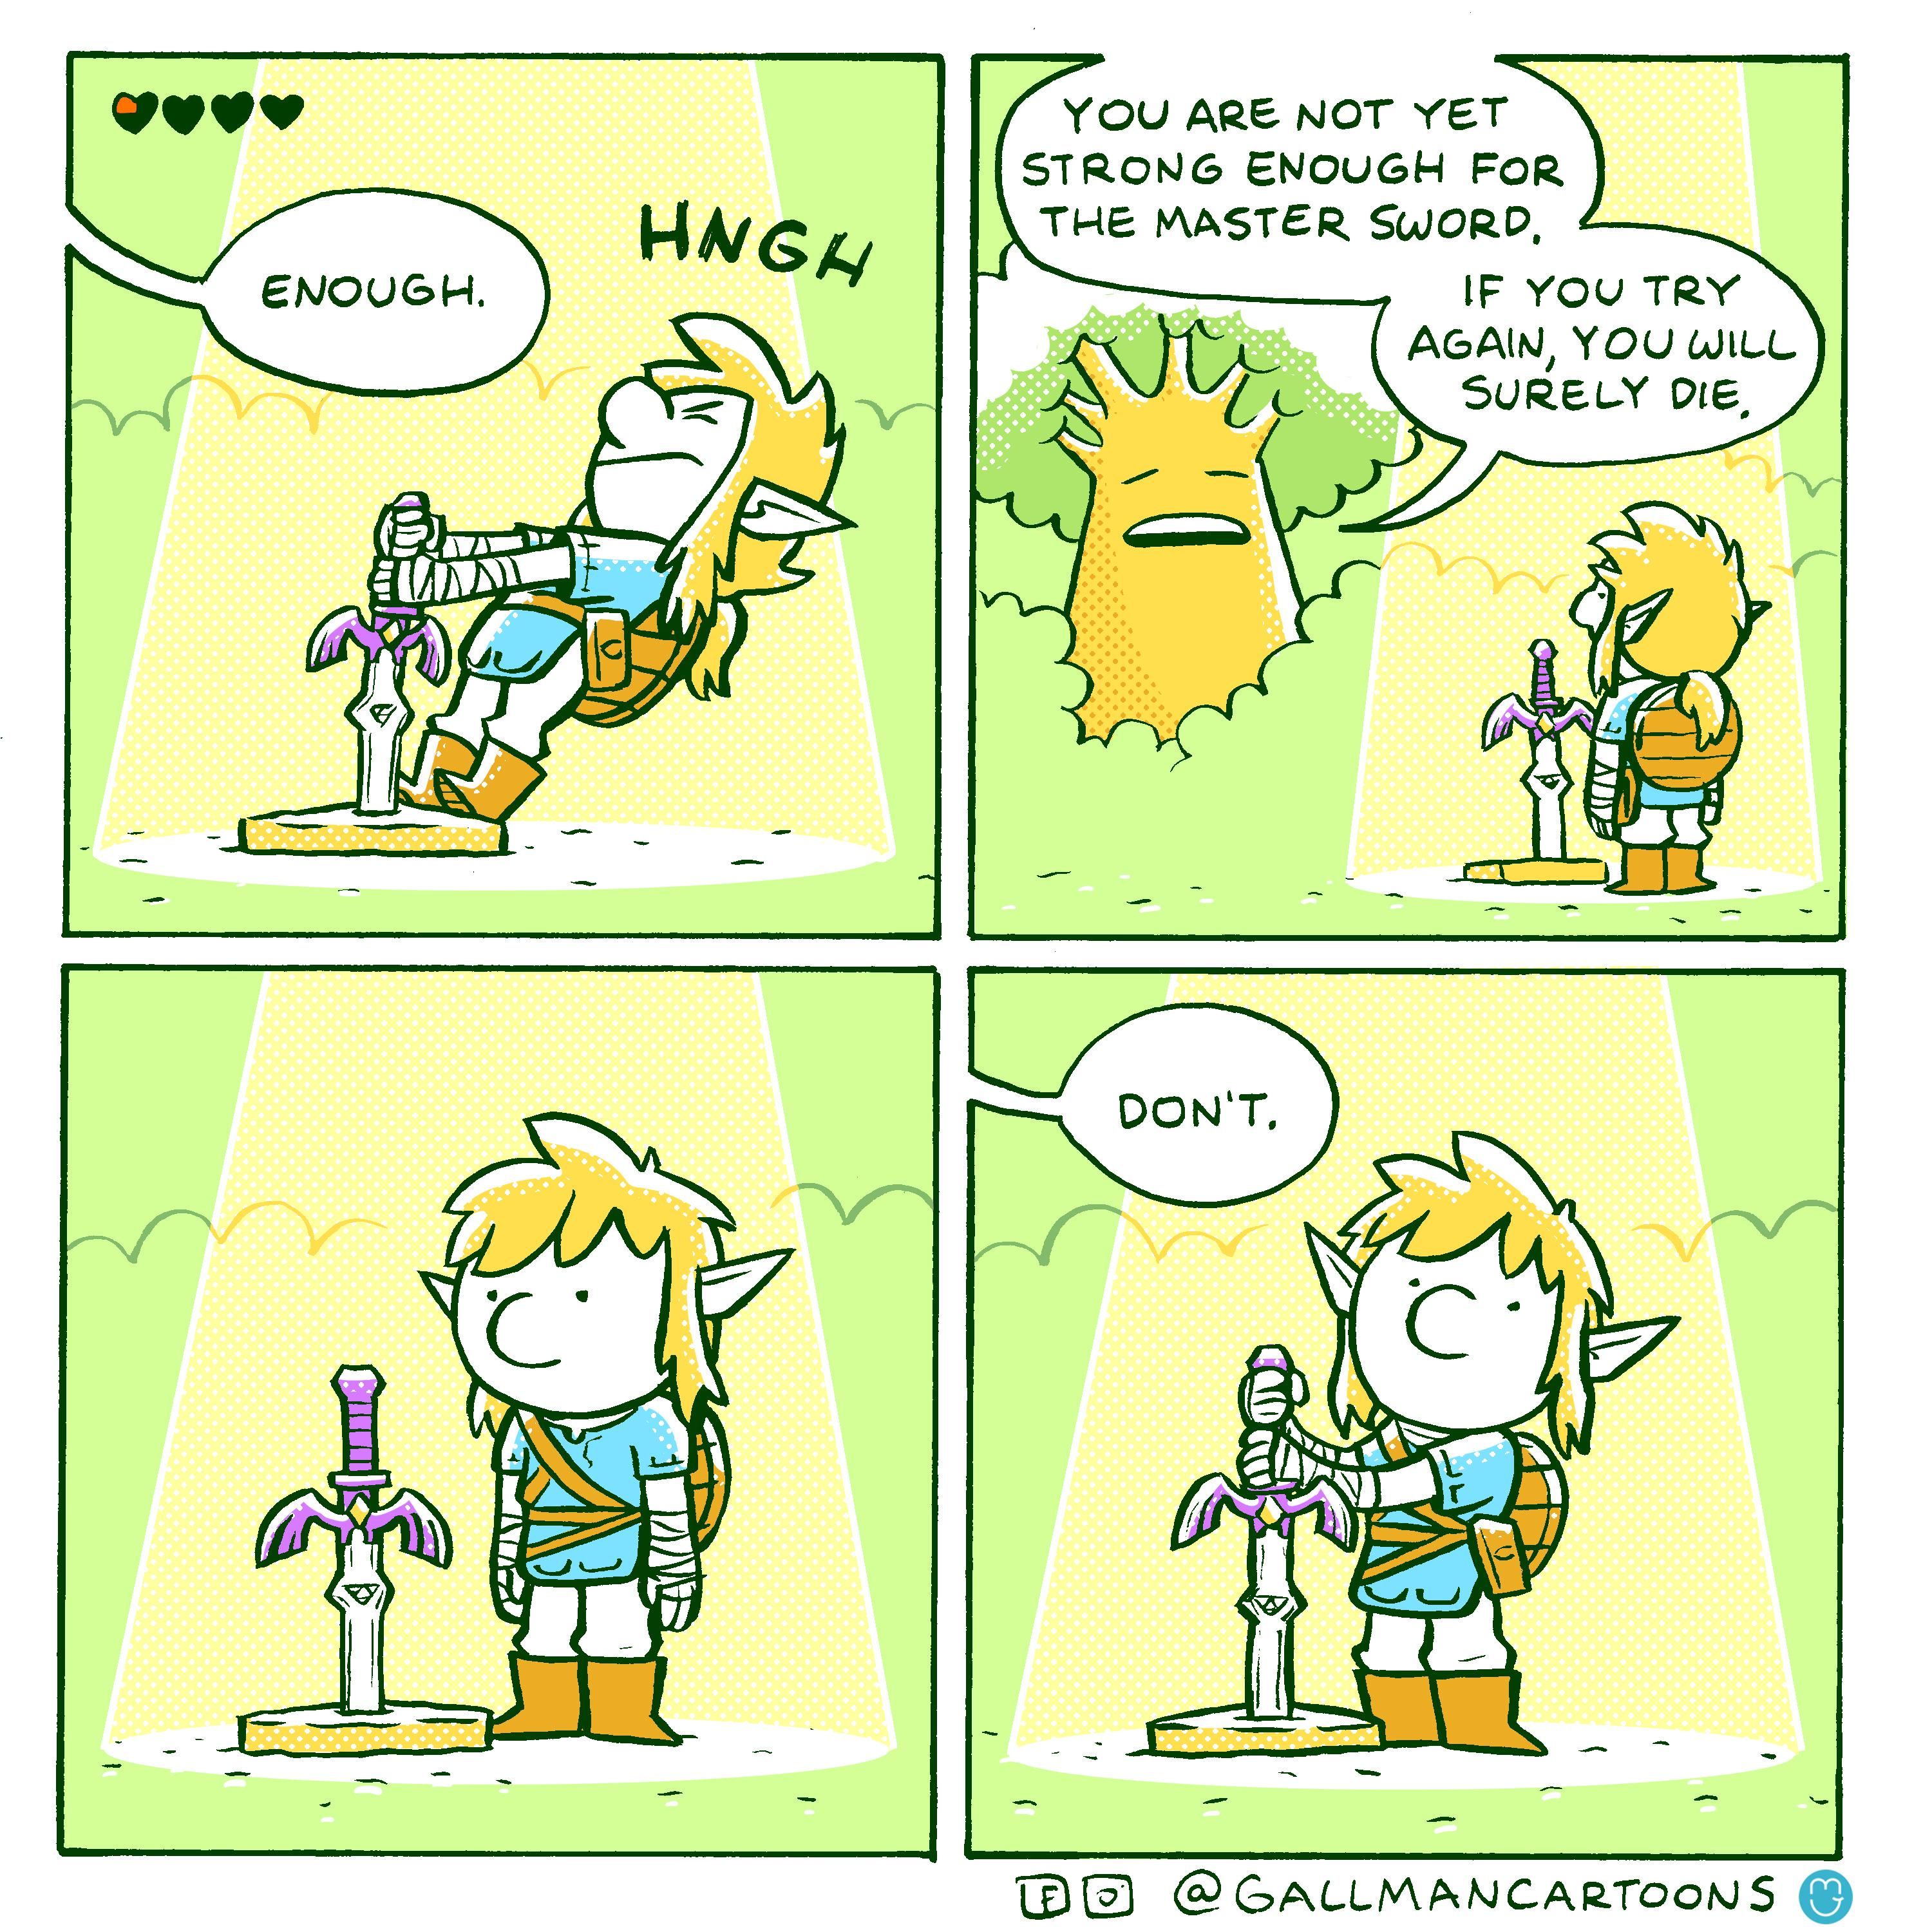 Finding the Master Sword